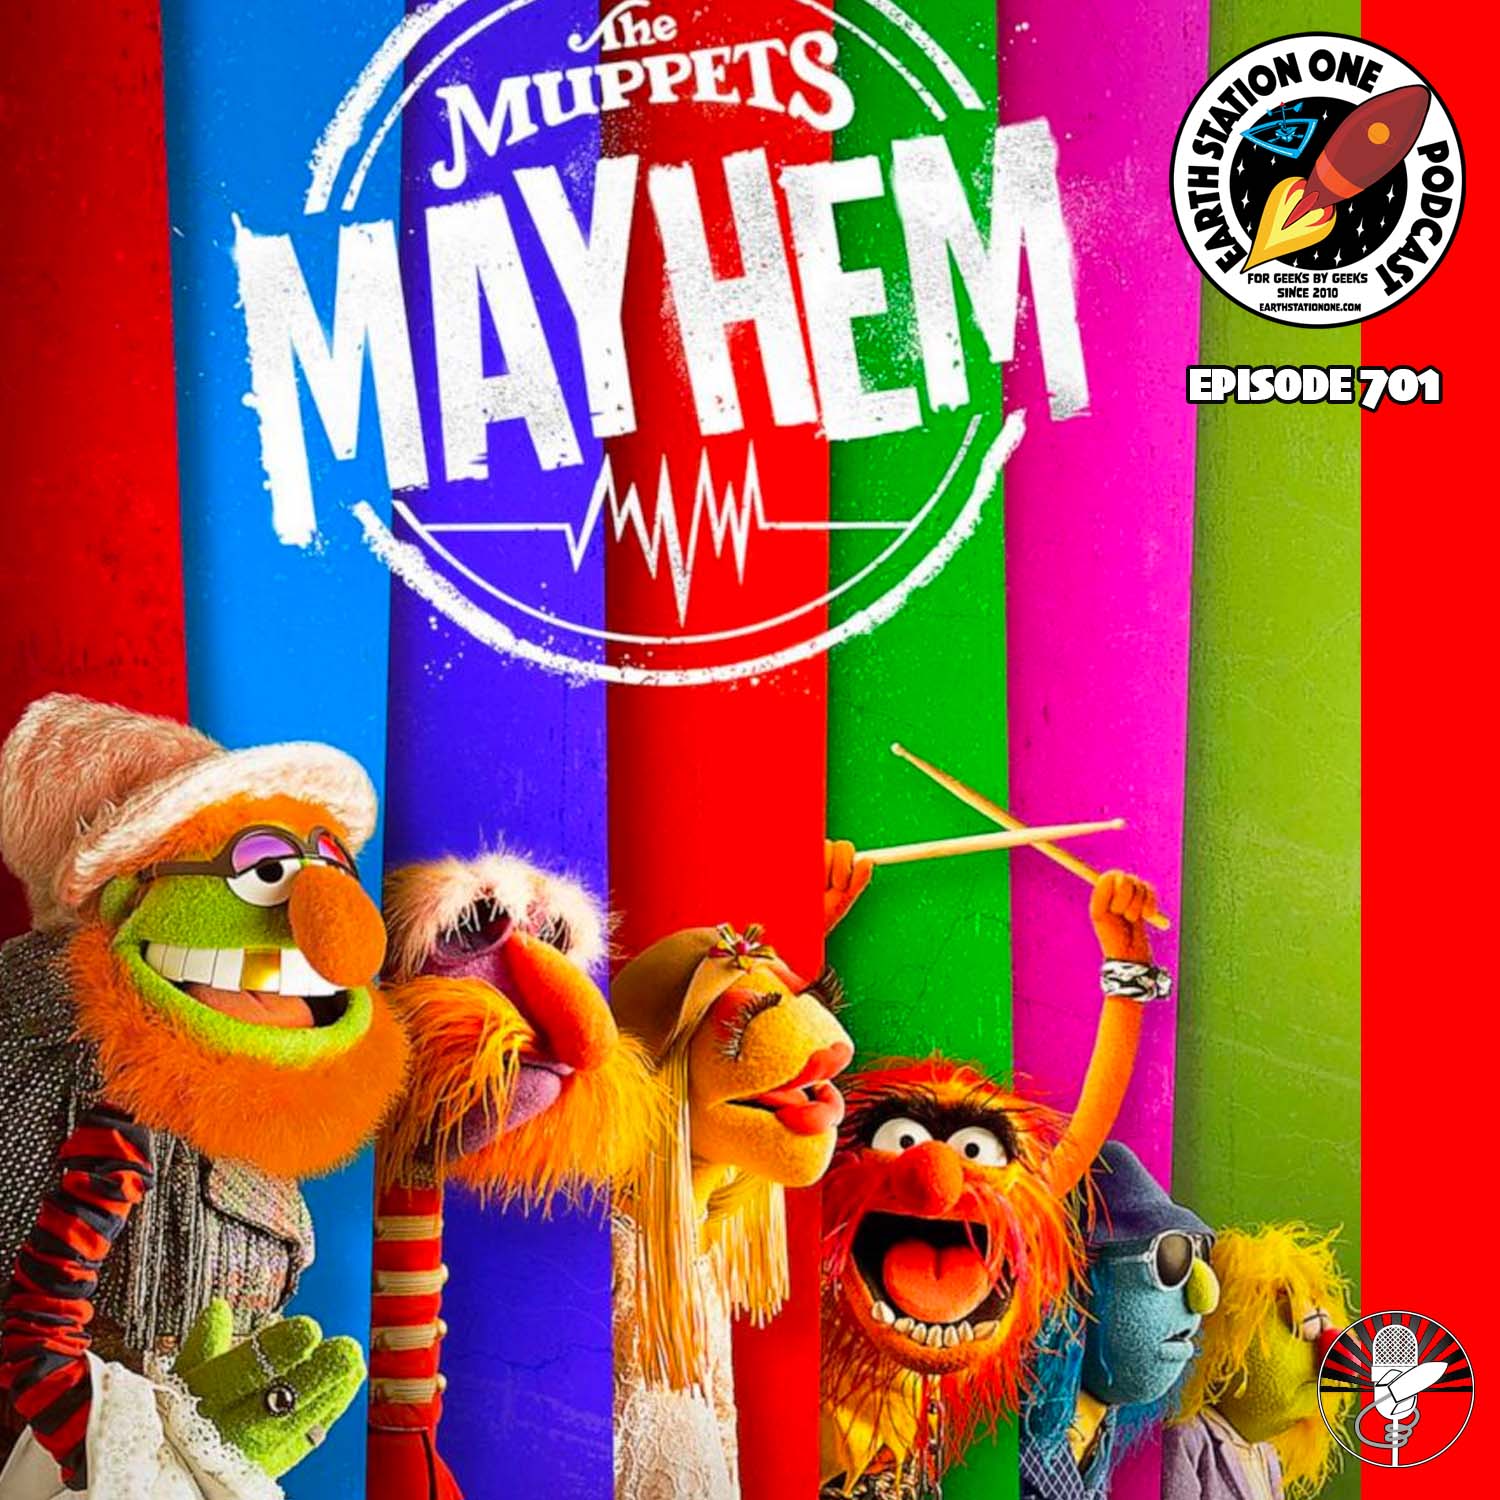 The Earth Station One Podcast ep 701 - Muppets Mayhem Review